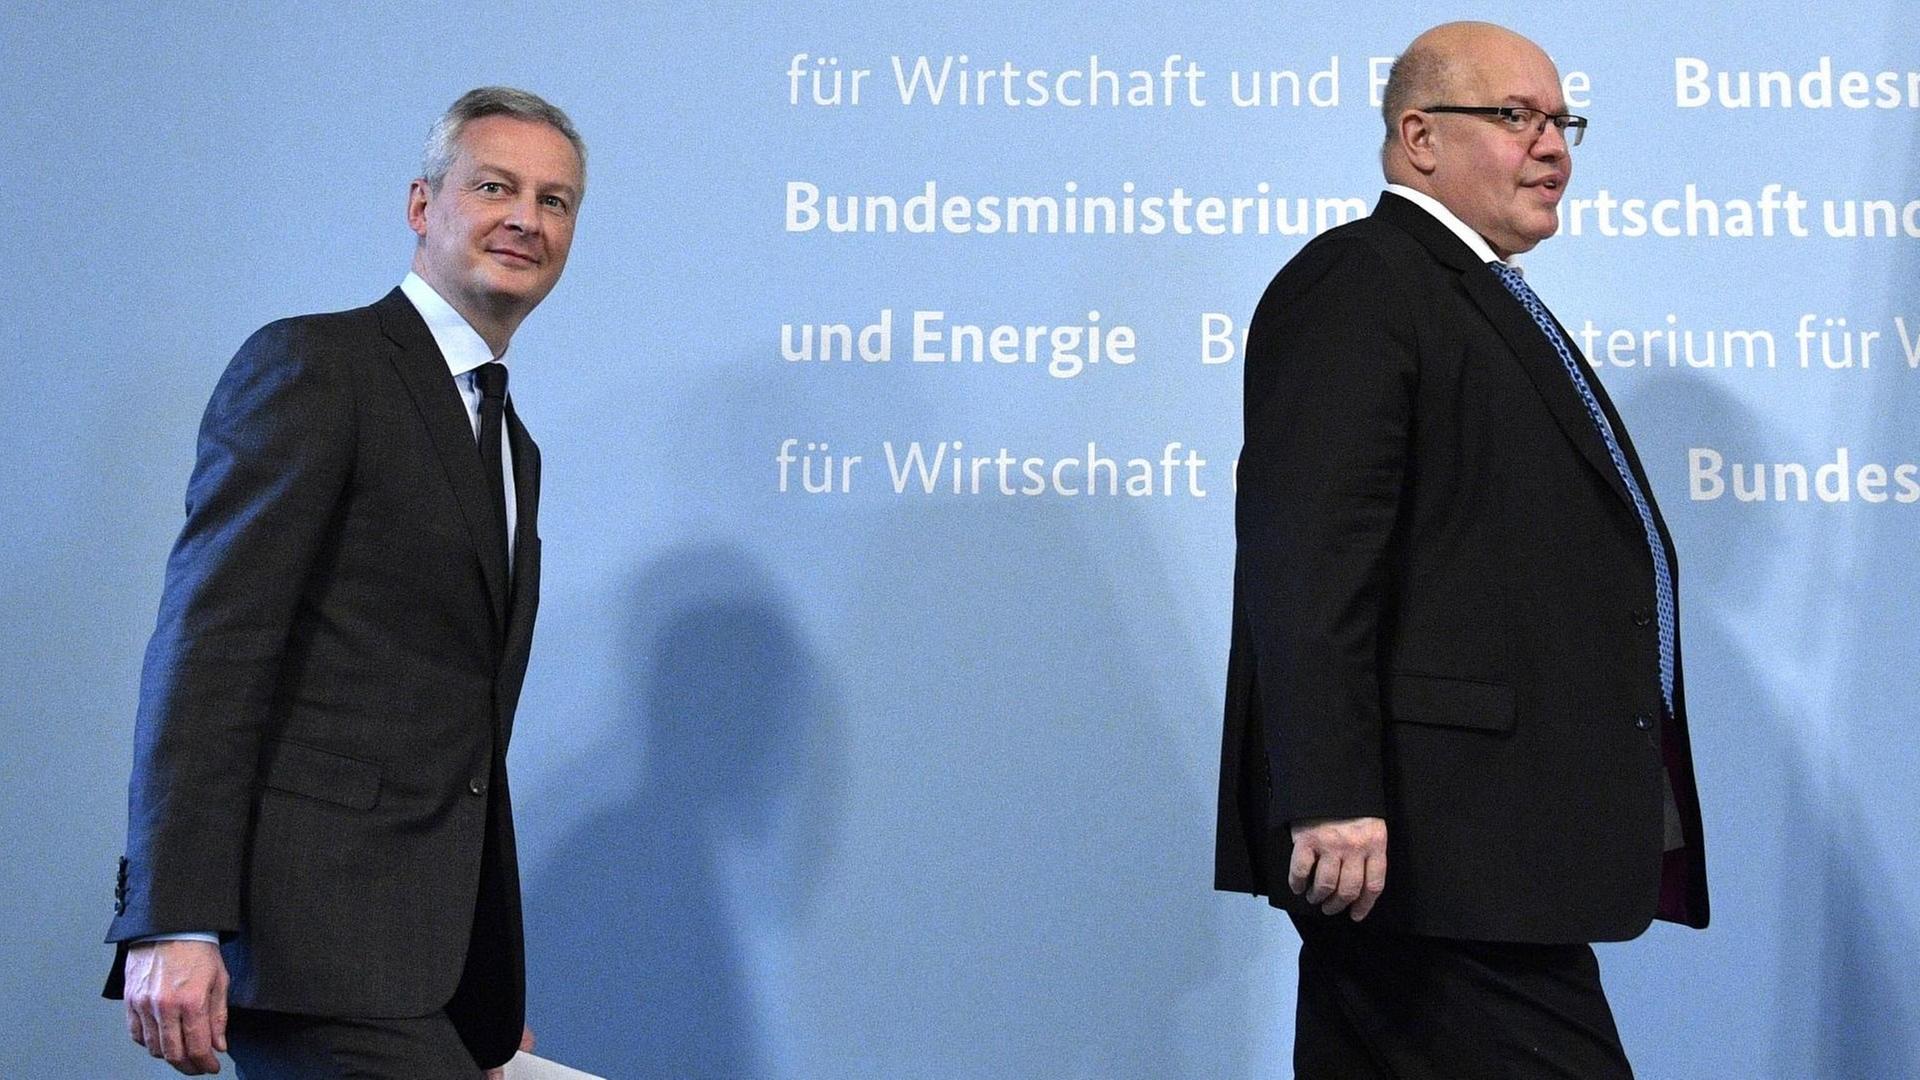 German Economy Minister Peter Altmaier and his French counterpart Bruno Le Maire arrive for a press conference on February 19, 2019 in Berlin, following talks on EU industrial policy. (Photo by John MACDOUGALL / AFP)